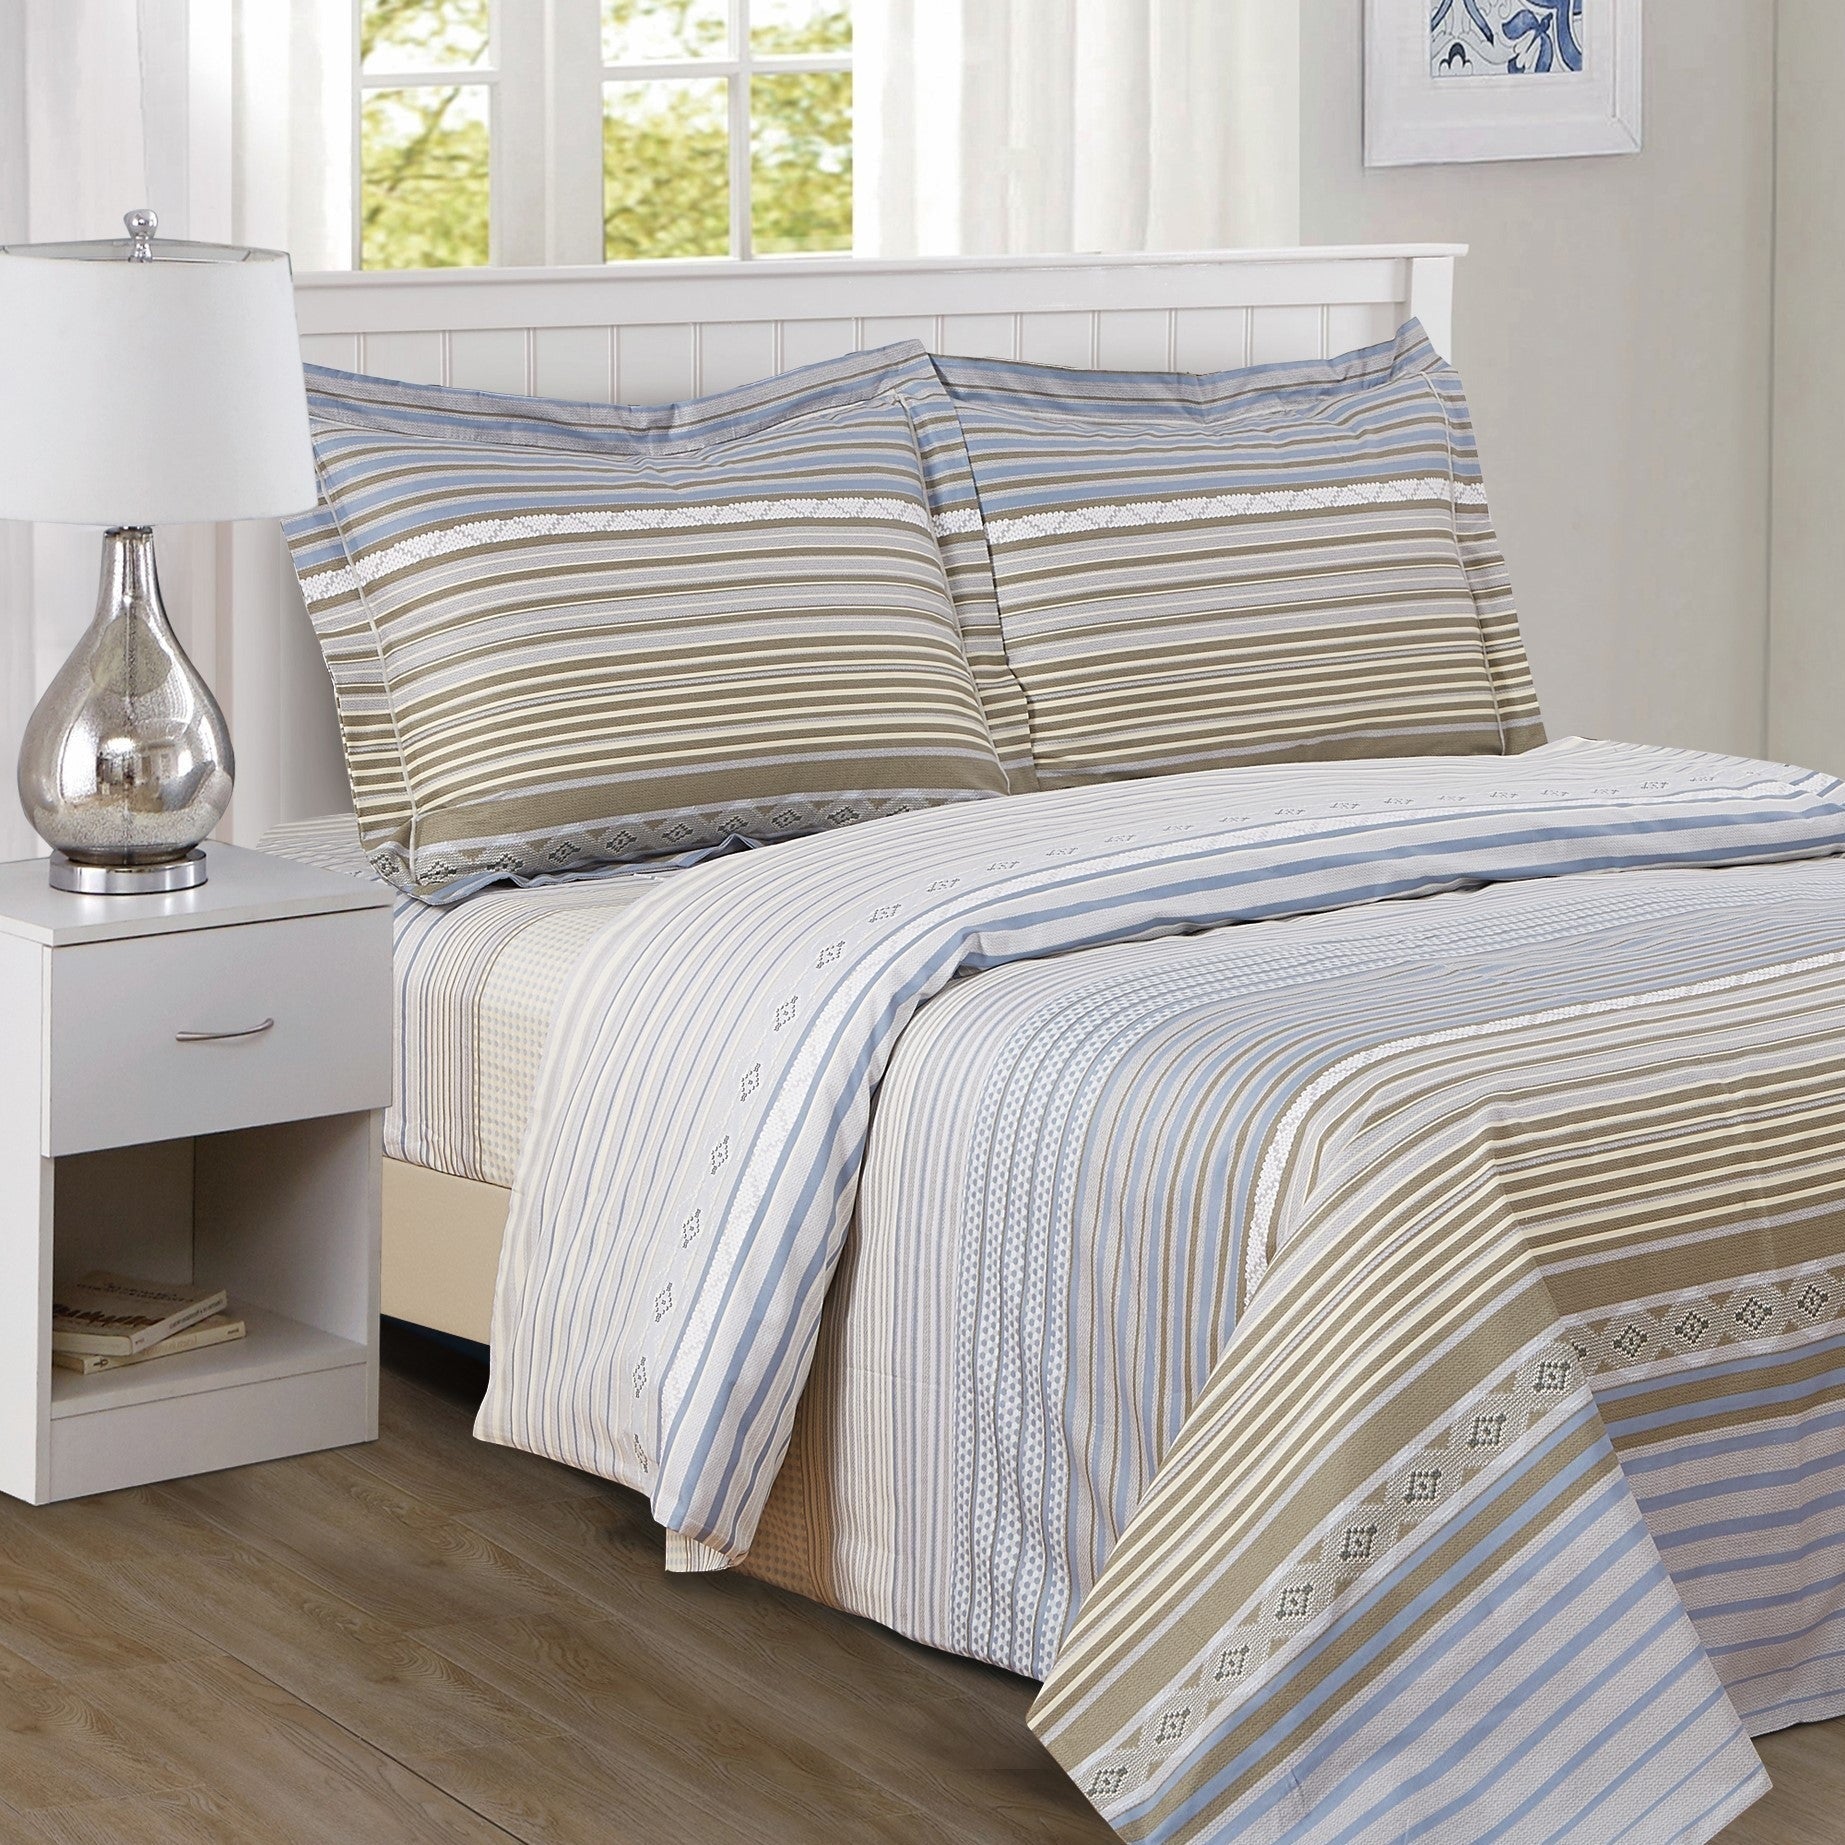 French Heritage New 6 Piece Bedding Set